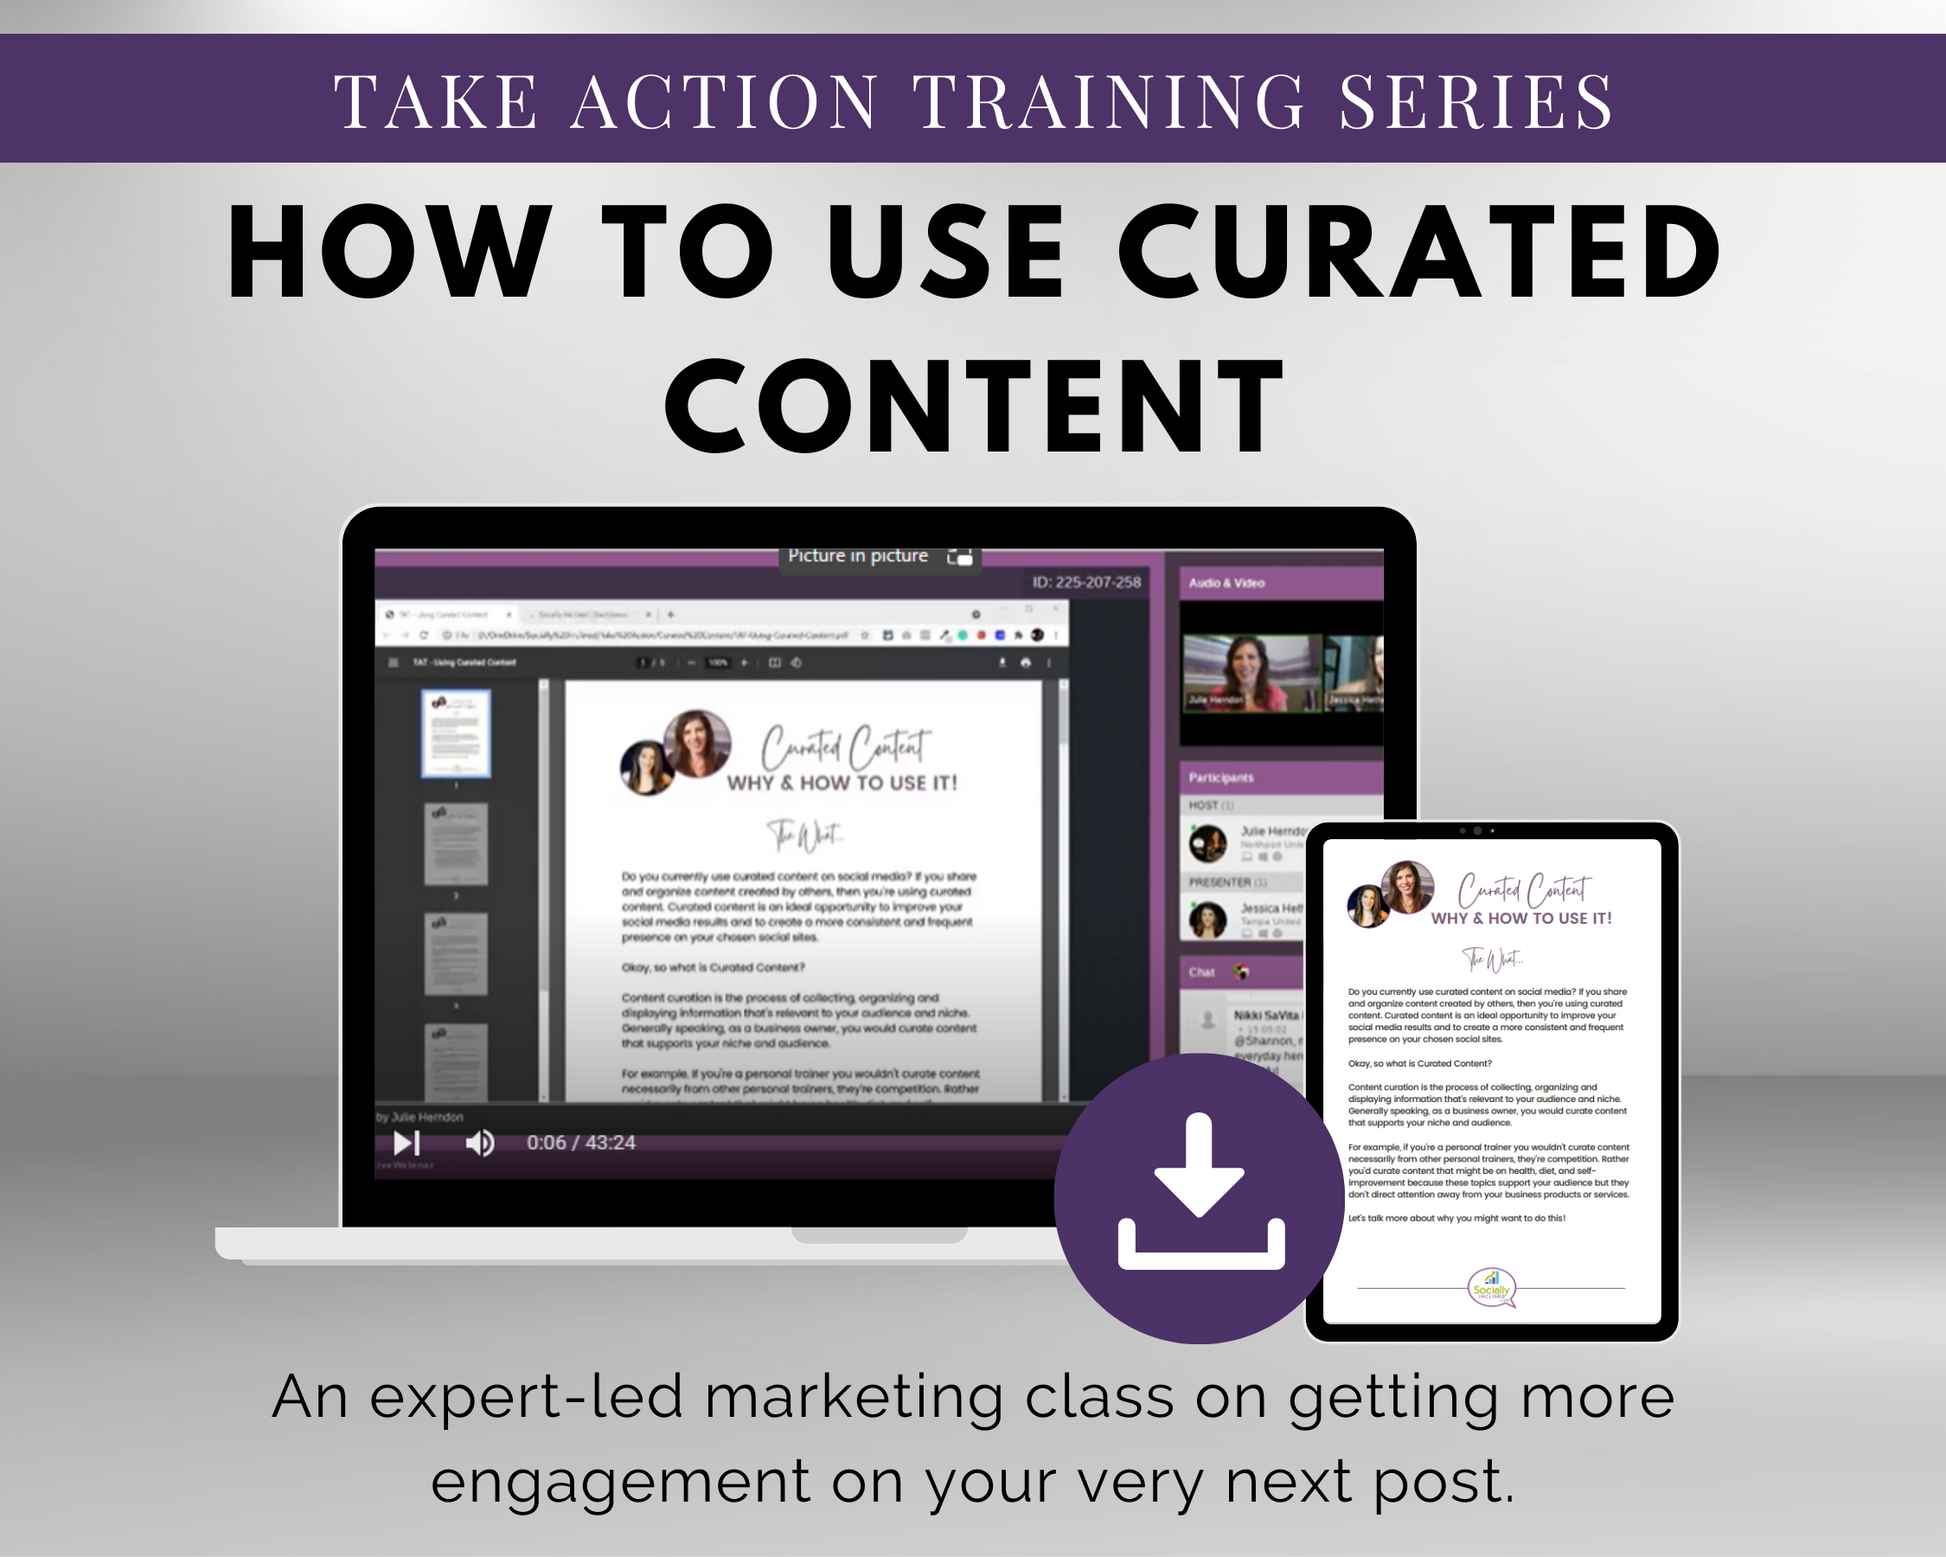 Take the TAT - How to Use Curated Content Masterclass training series on how to curate content effectively by Get Socially Inclined.